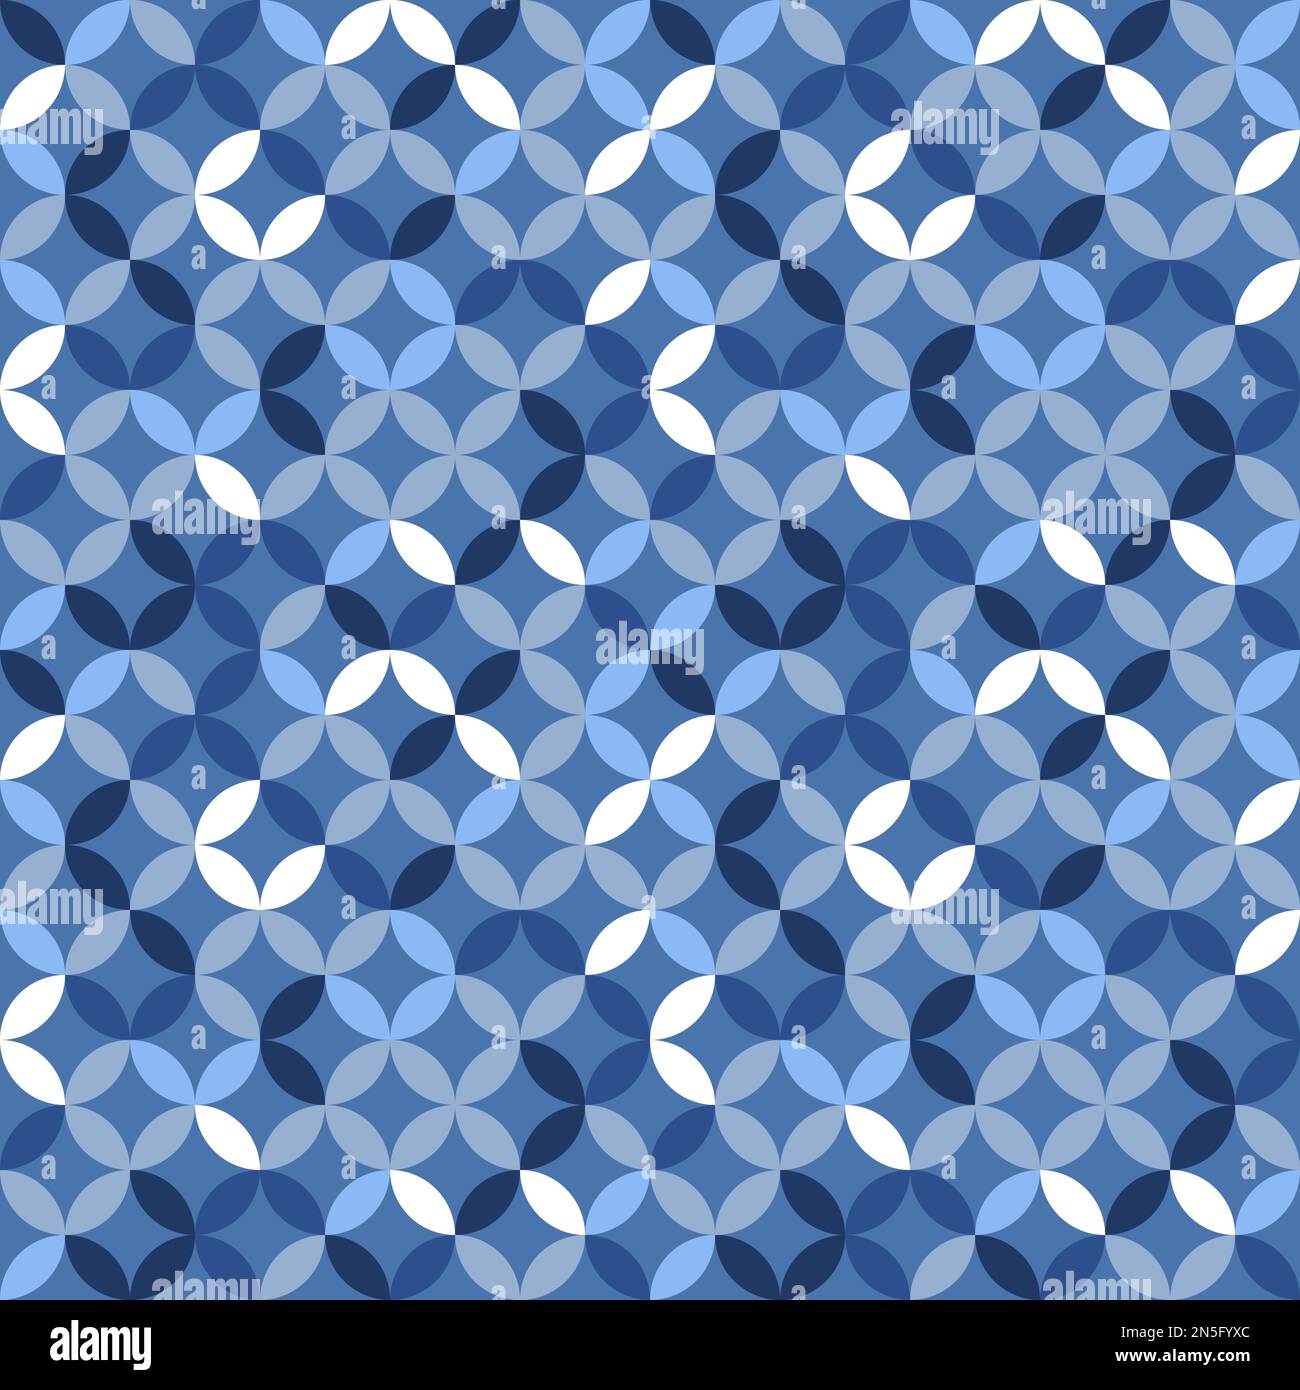 Blue geometric pattern. Interconnecting circles and ovals abstract retro fashion texture. Seamless pattern. Stock Vector